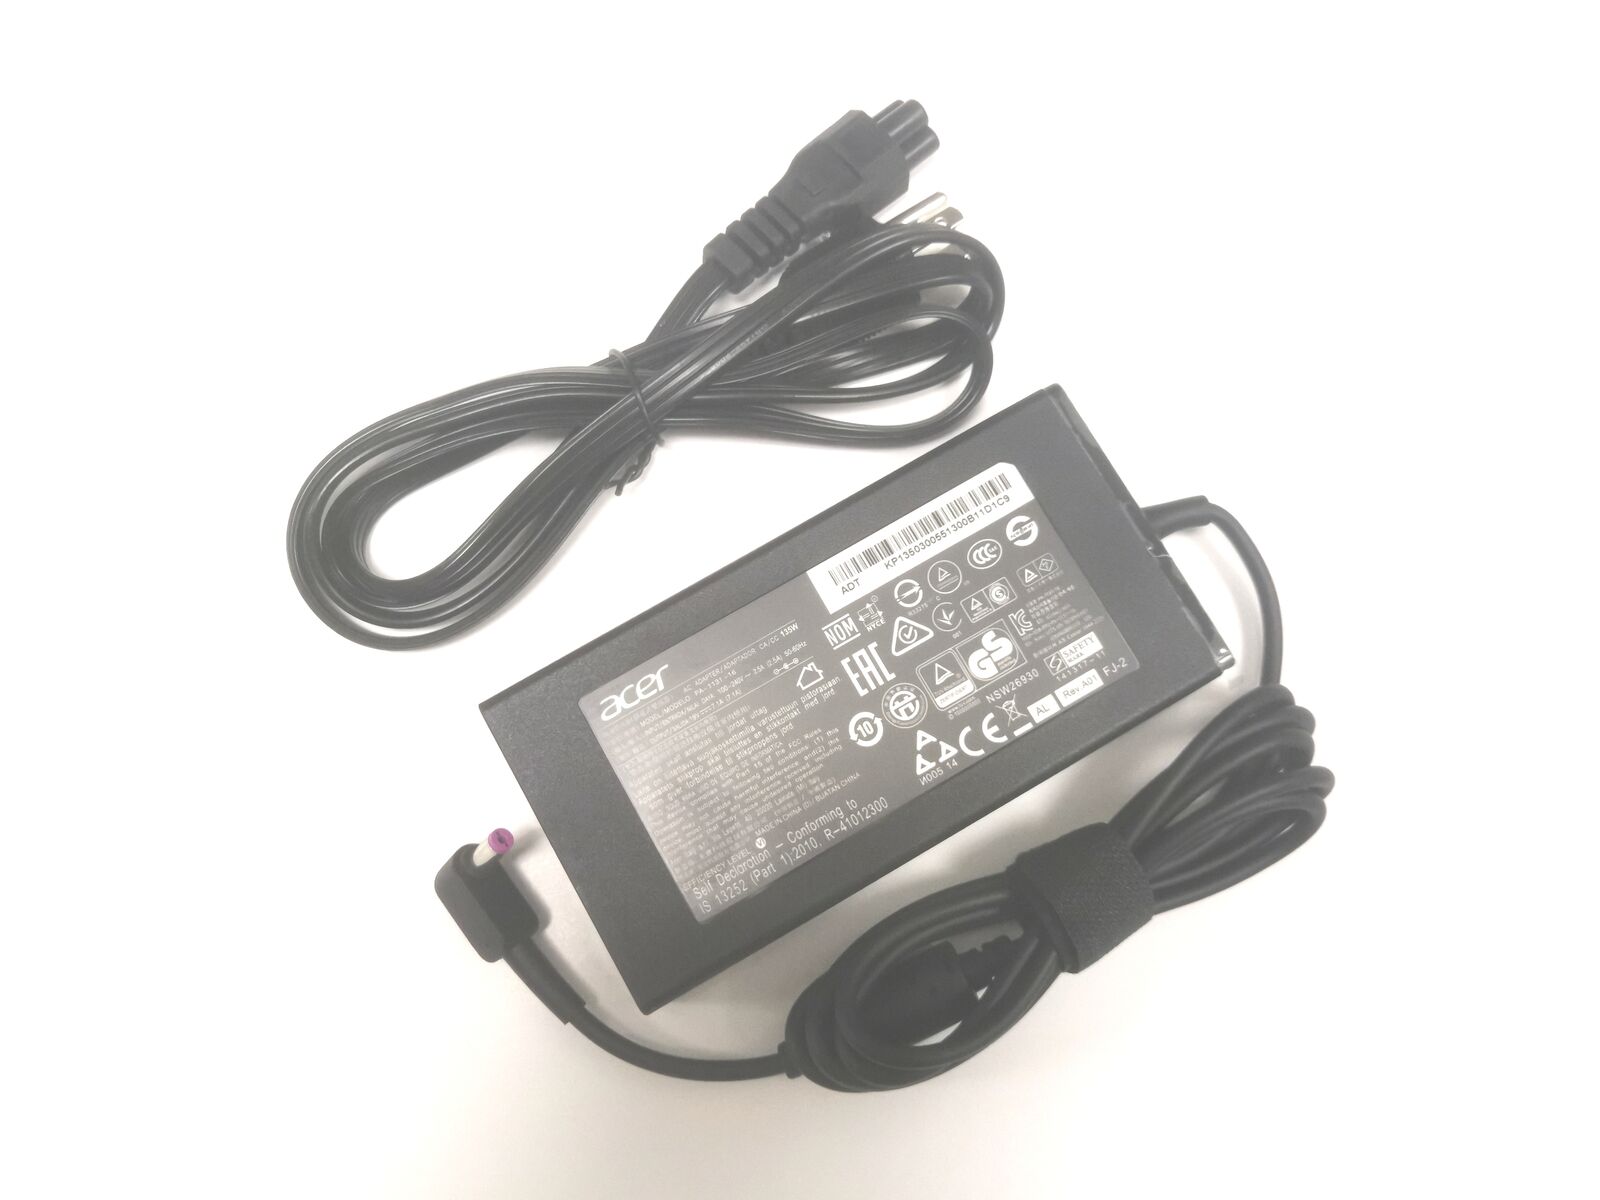 Genuine Acer Nitro Laptop Charger 135W 19V 7.1A AC Power Adapter PA-1131-16